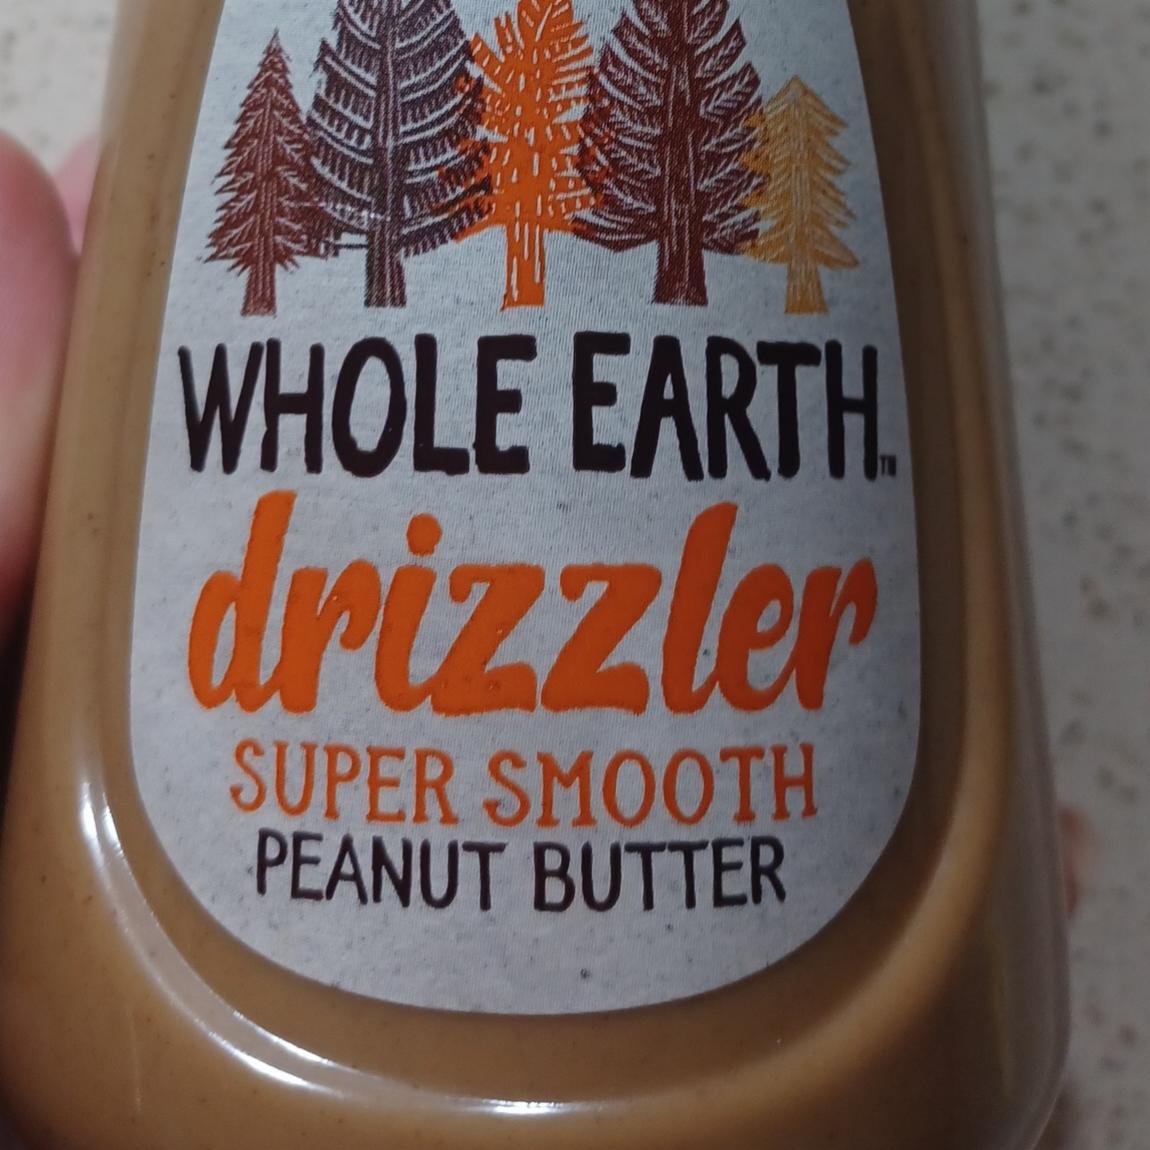 Fotografie - Drizzler super smooth peanut butter Whole Earth